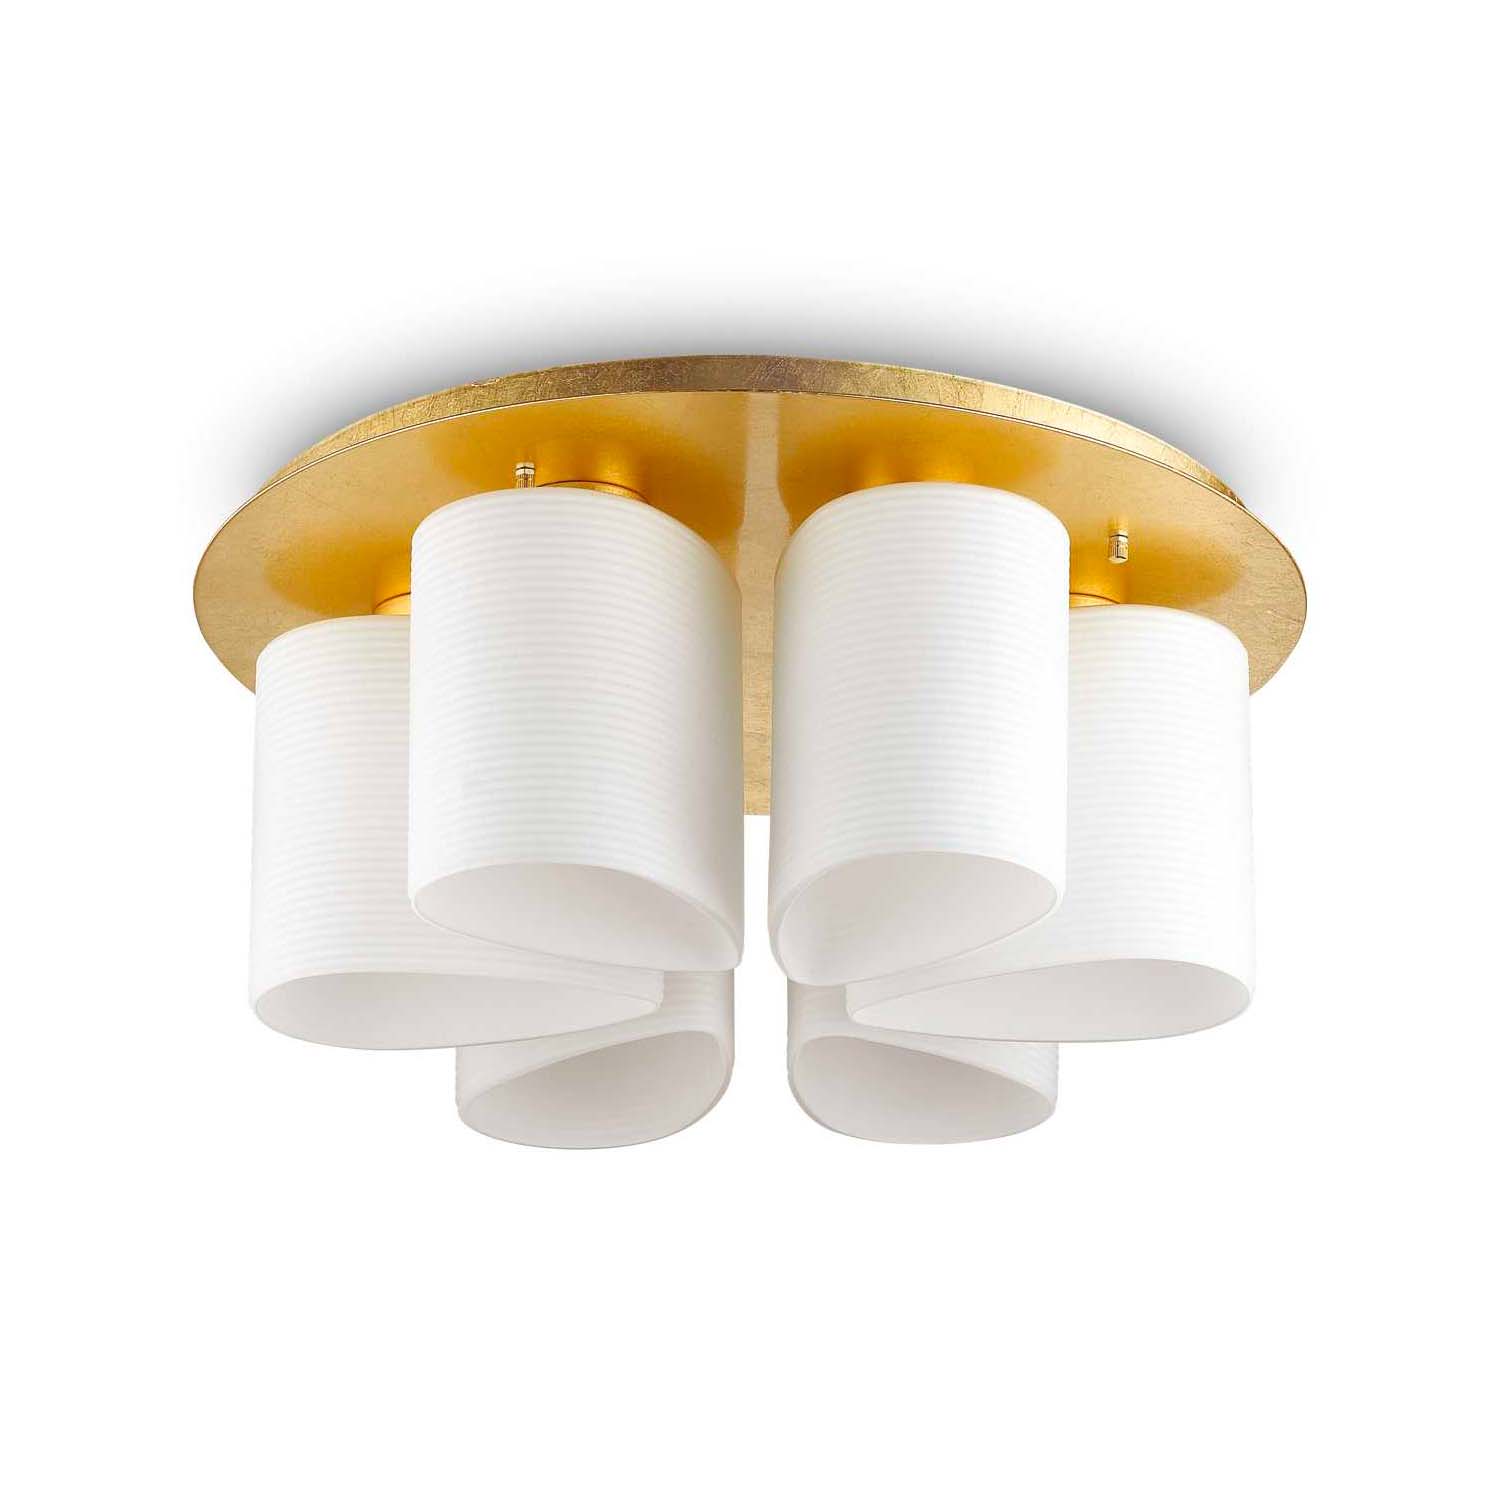 DAISY - Flower-shaped ceiling light in white glass and brass